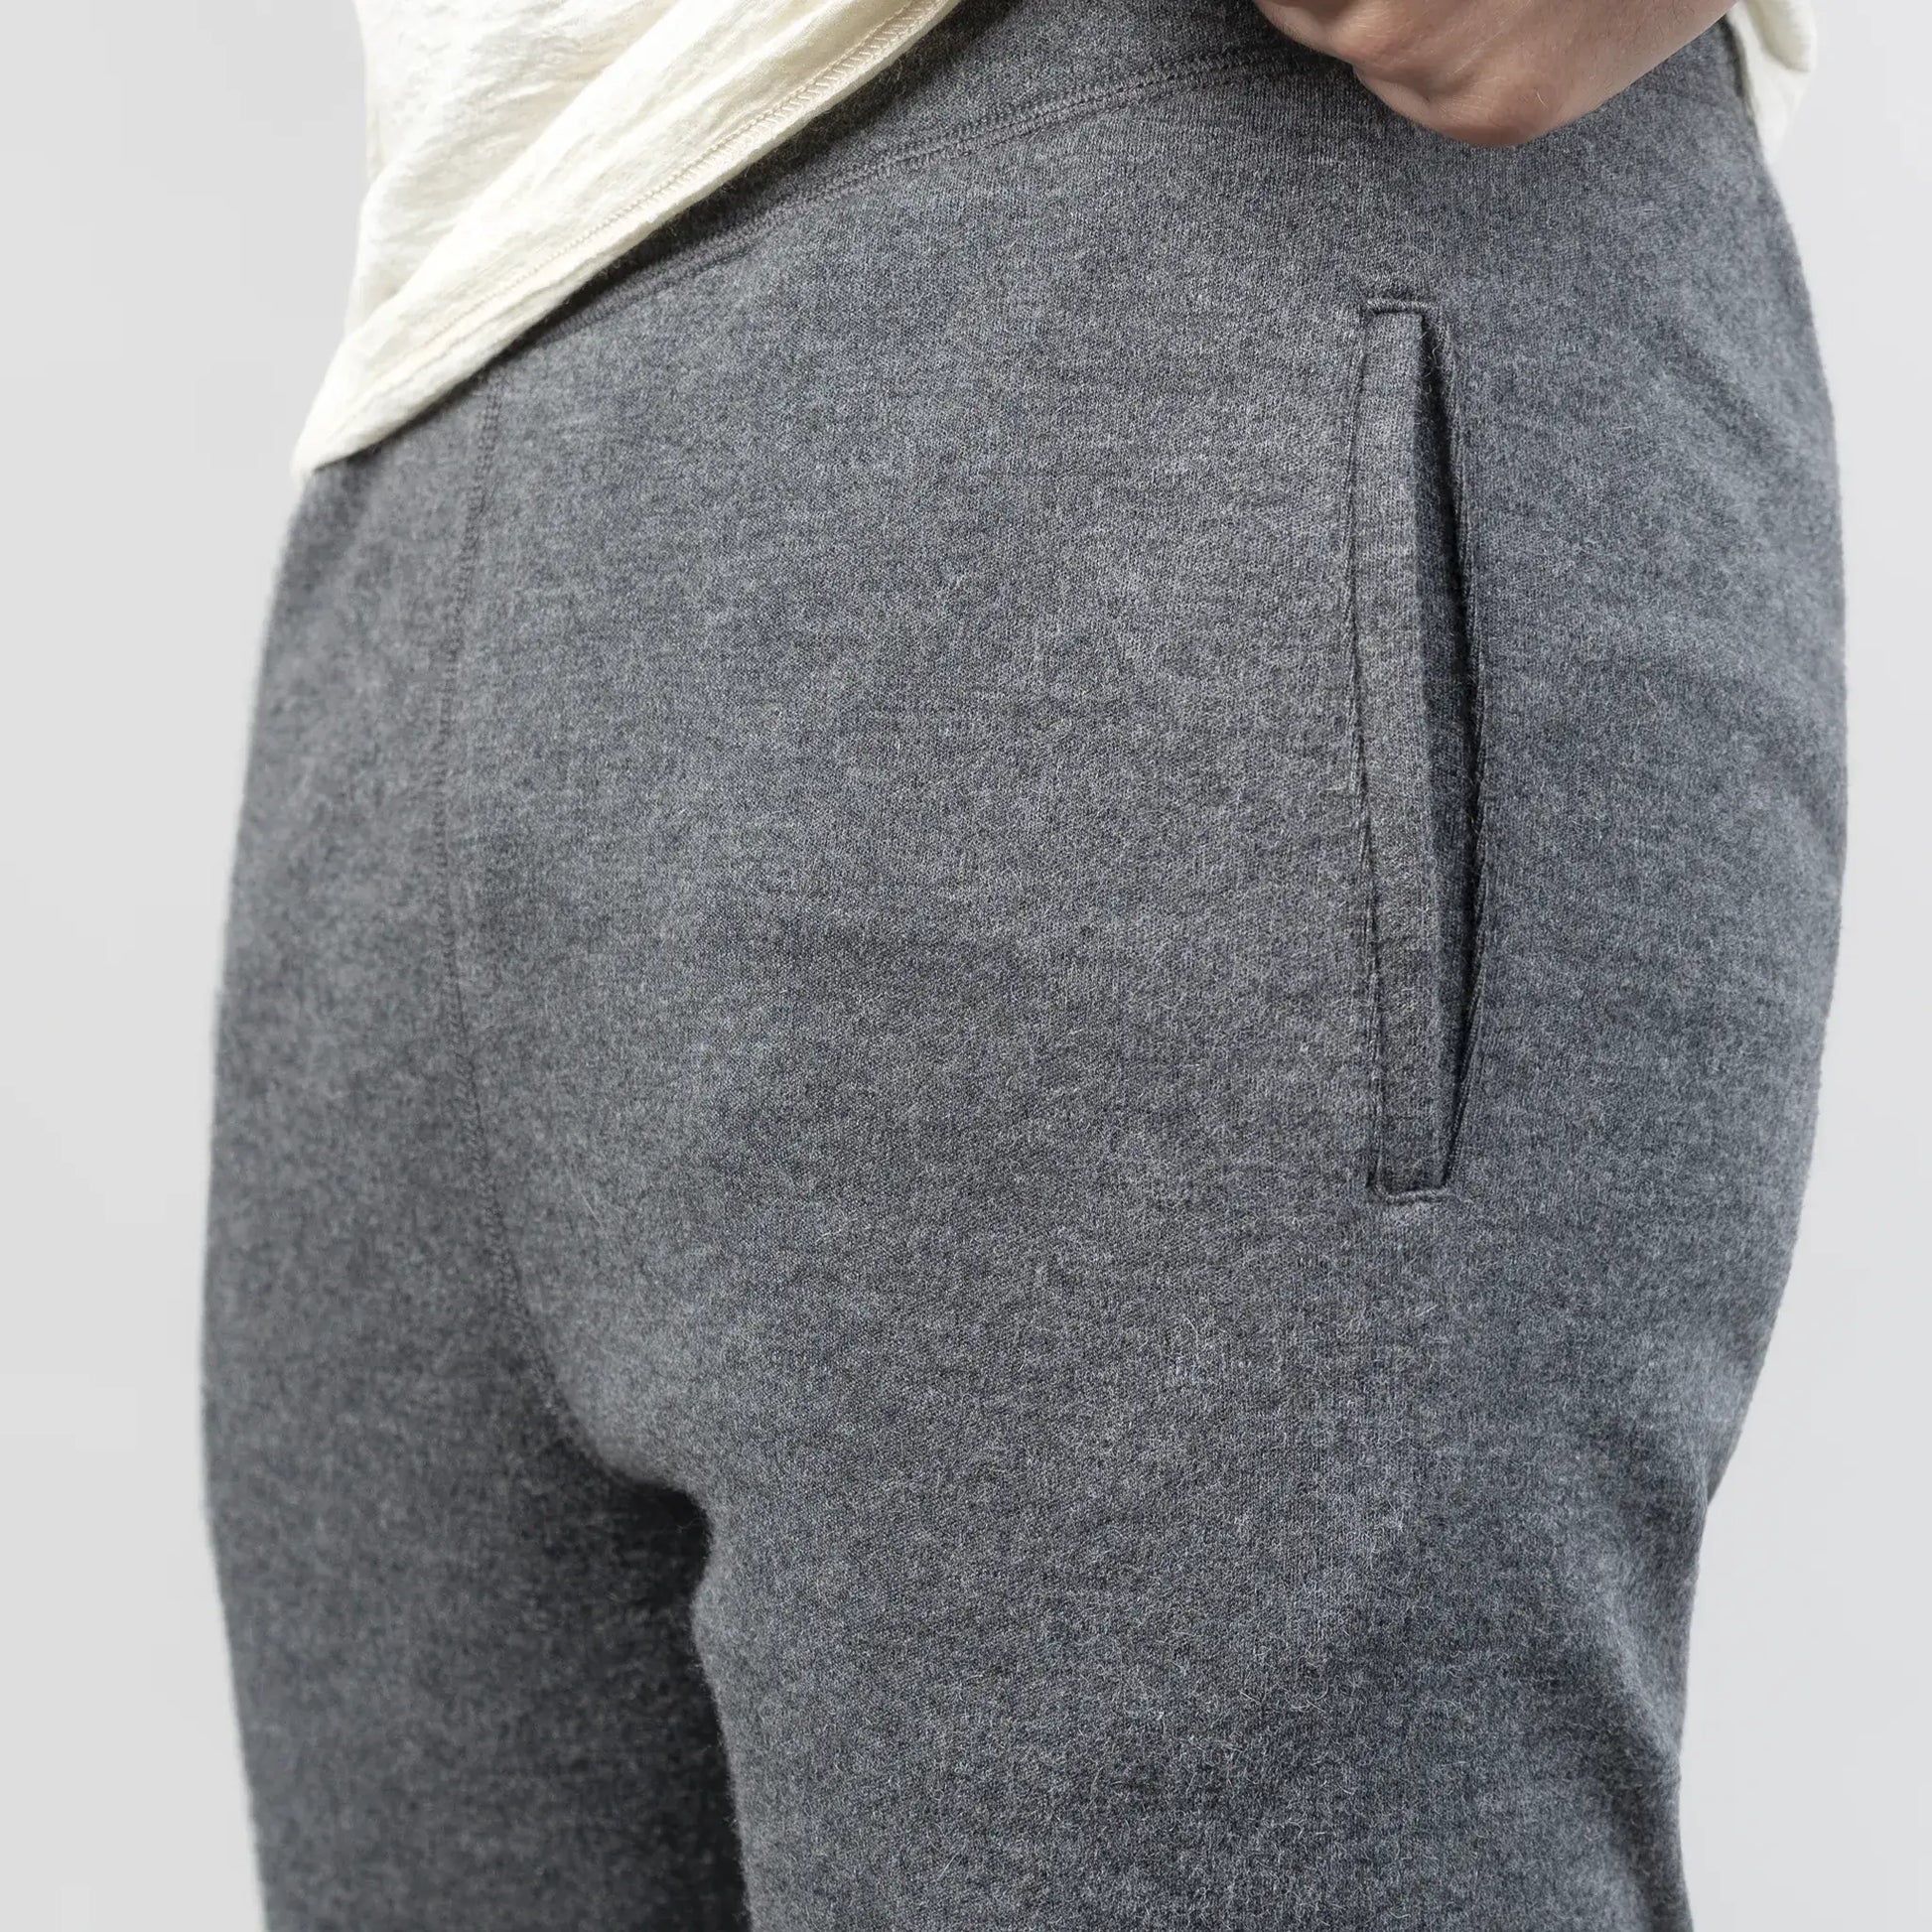 Men's Alpaca Wool Joggers: 230 Lightweight | Arms of Andes